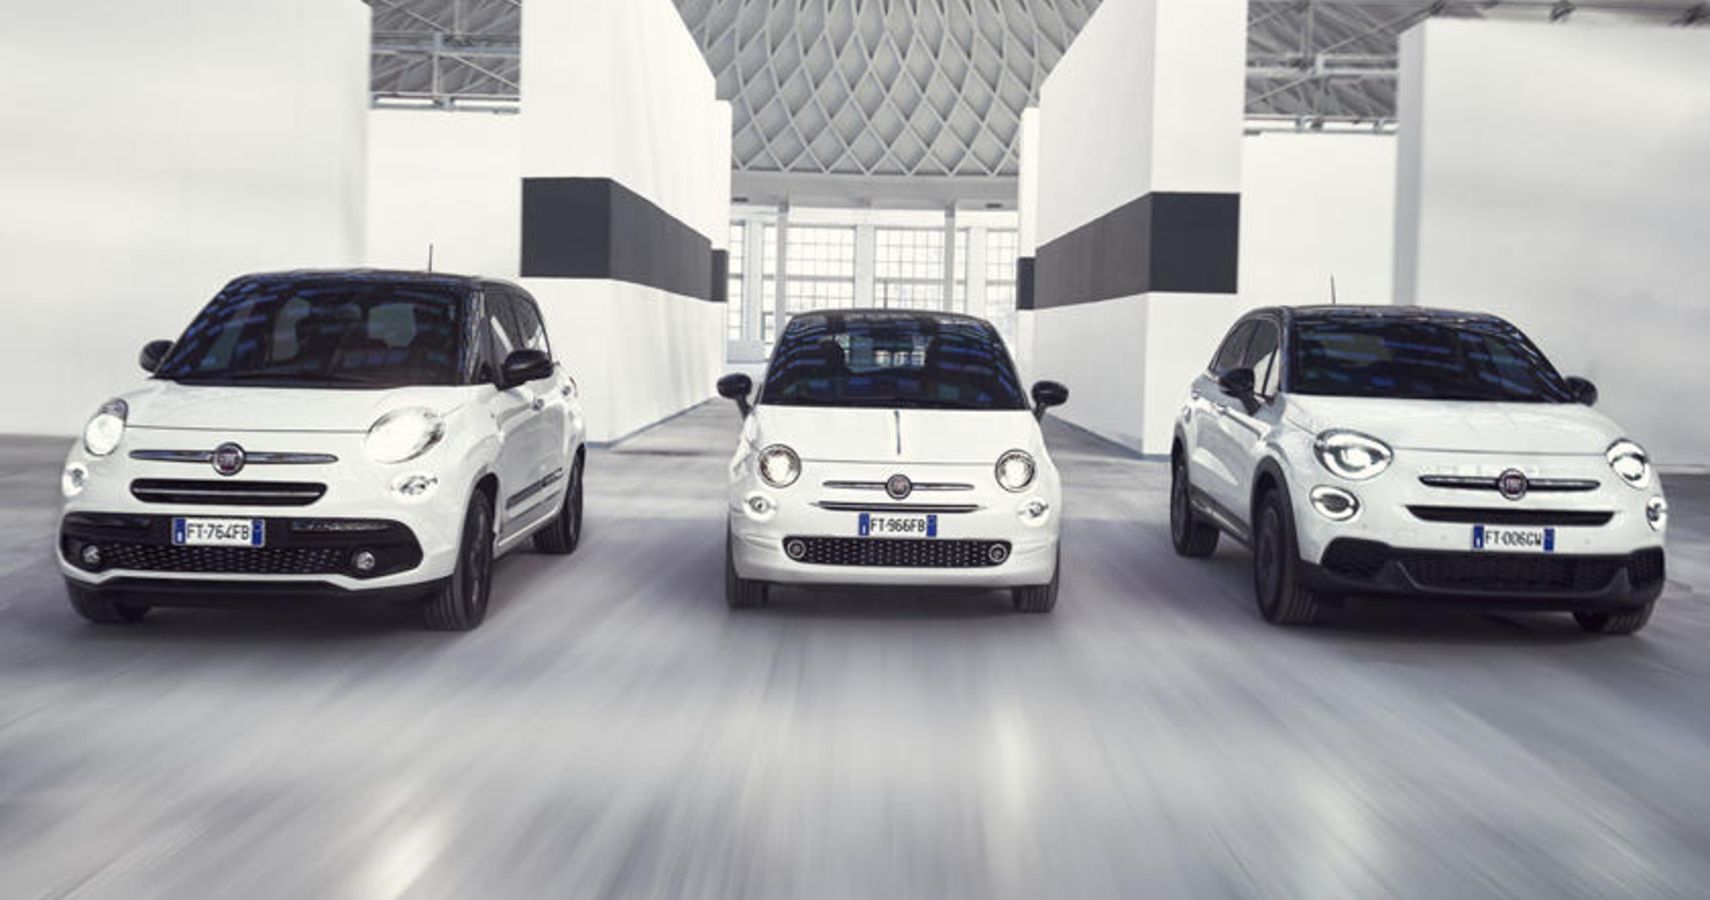 Evolution Of The Fiat 500